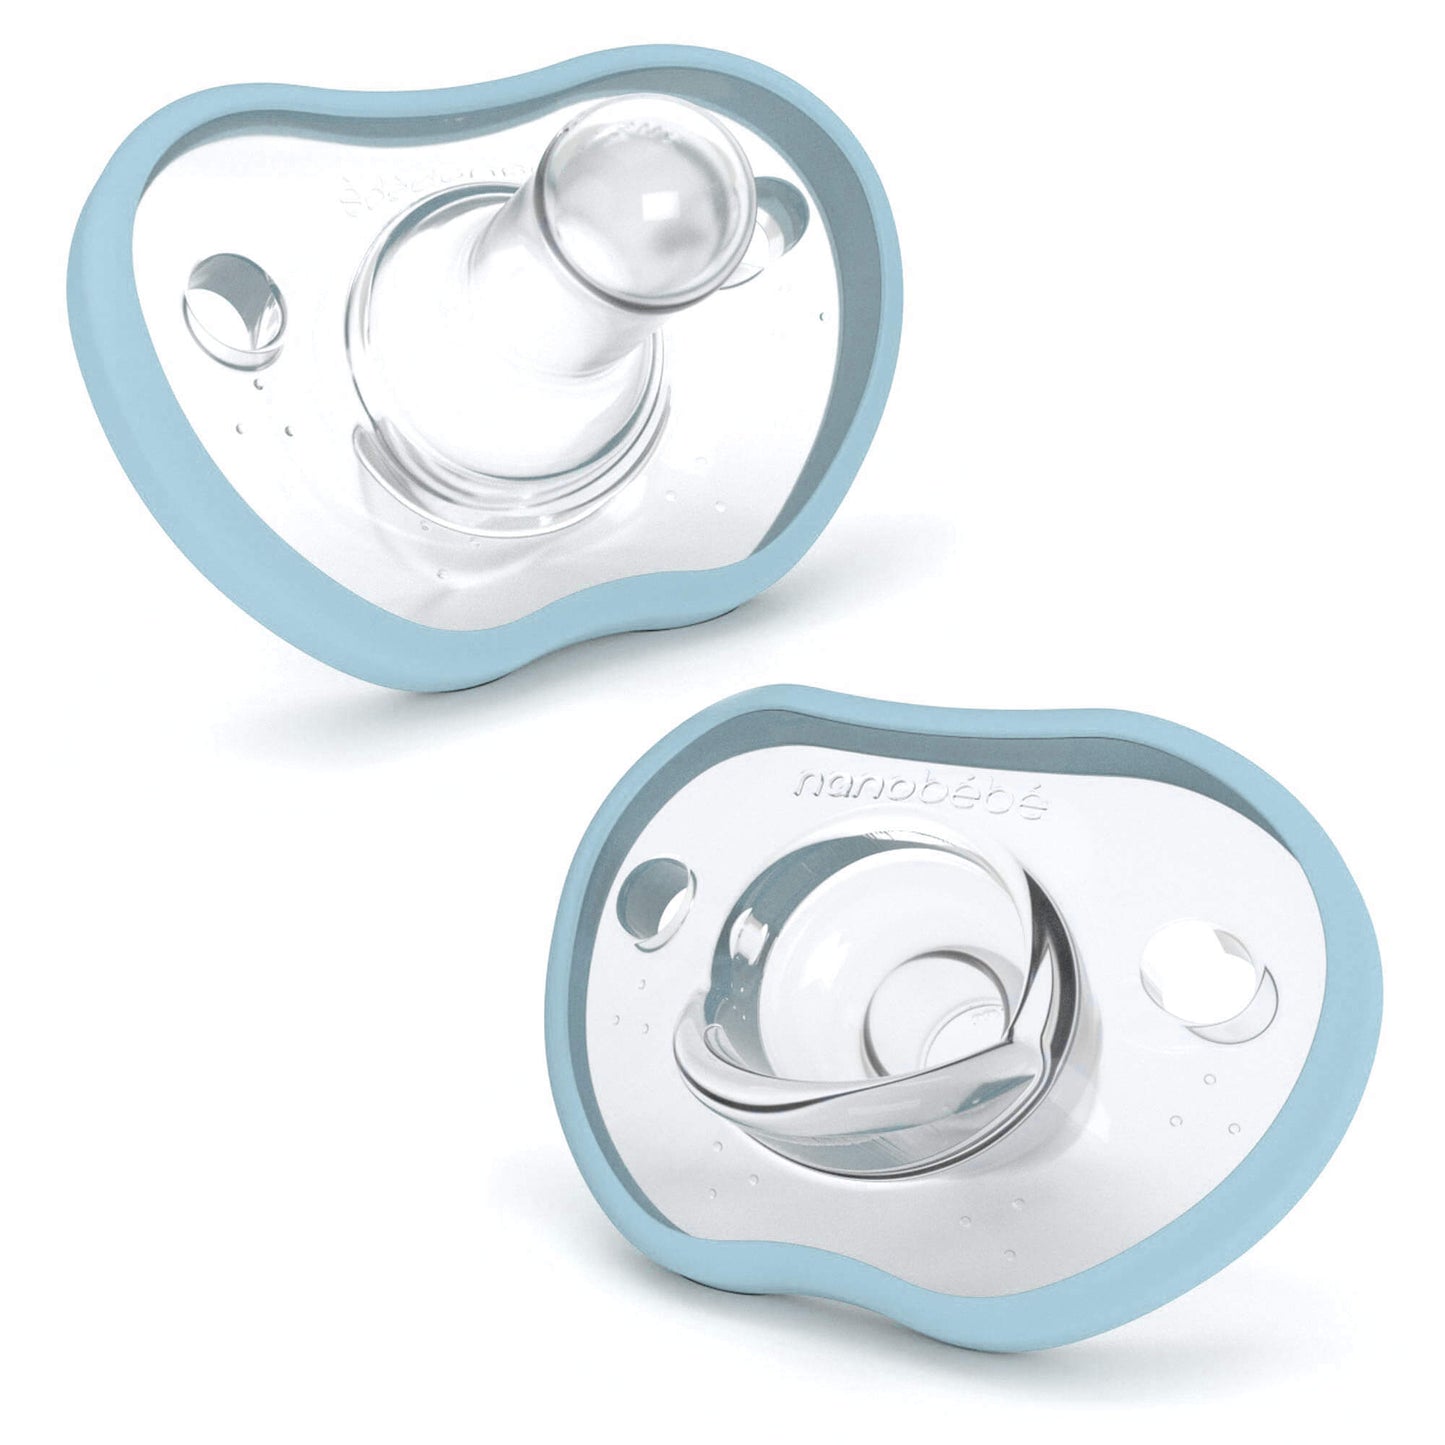 Limited-Edition Sky Blue Soother